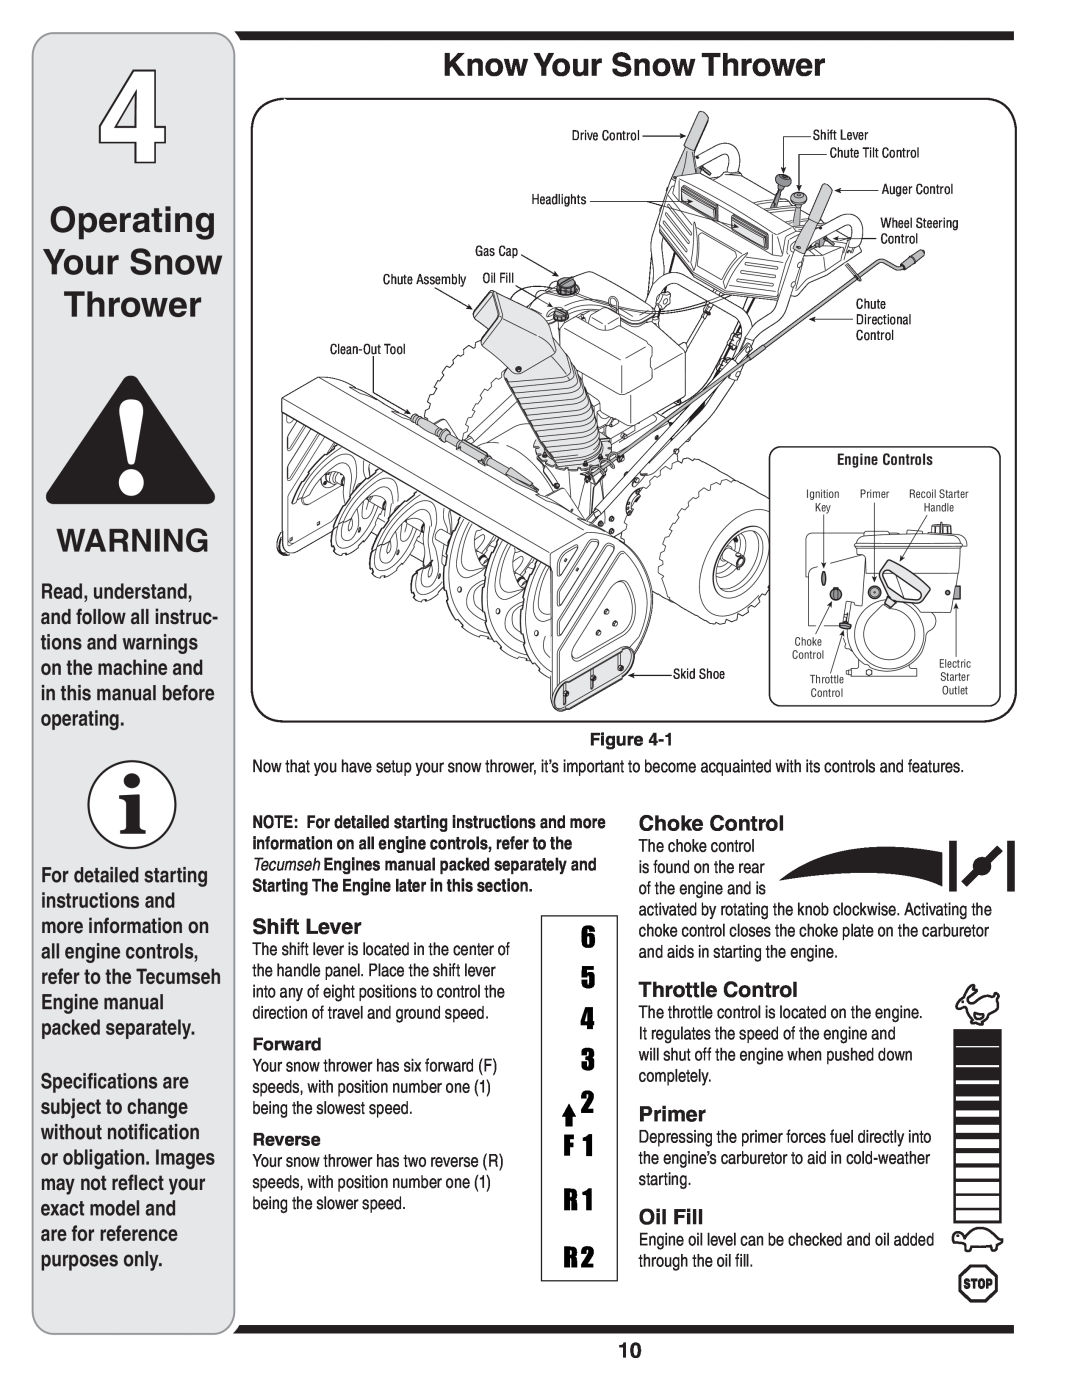 Troy-Bilt 31AH9Q77766 Operating Your Snow Thrower, Know Your Snow Thrower, Starting The Engine later in this section 